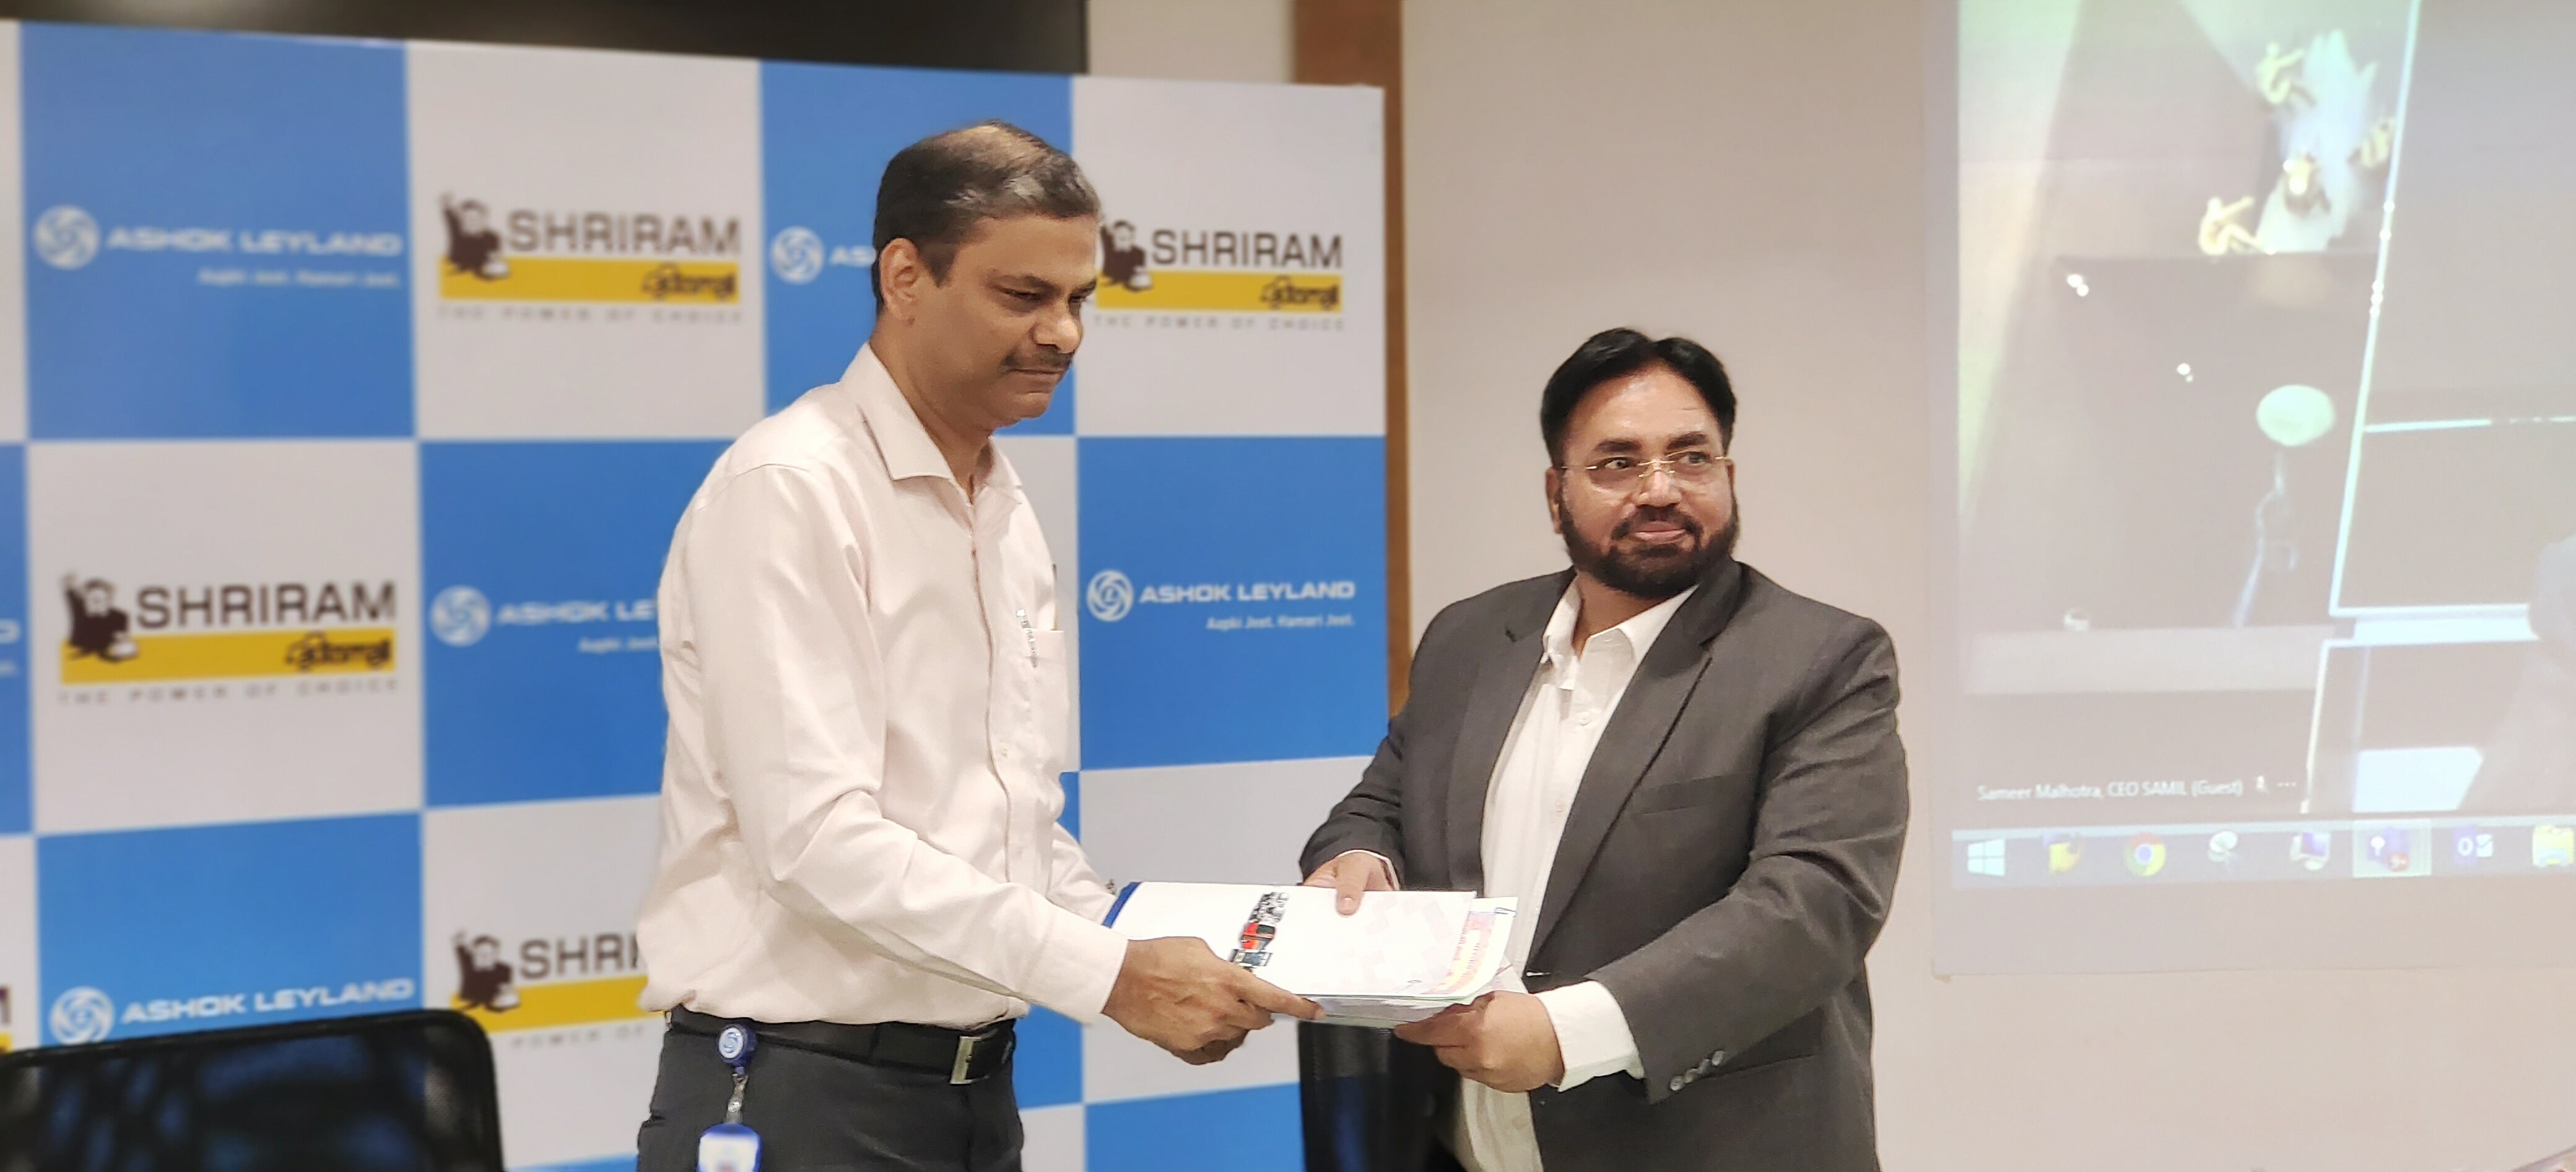 Ashok Leyland ties up with Shriram Auto Mall to enter the Used Commercial Vehicles Business